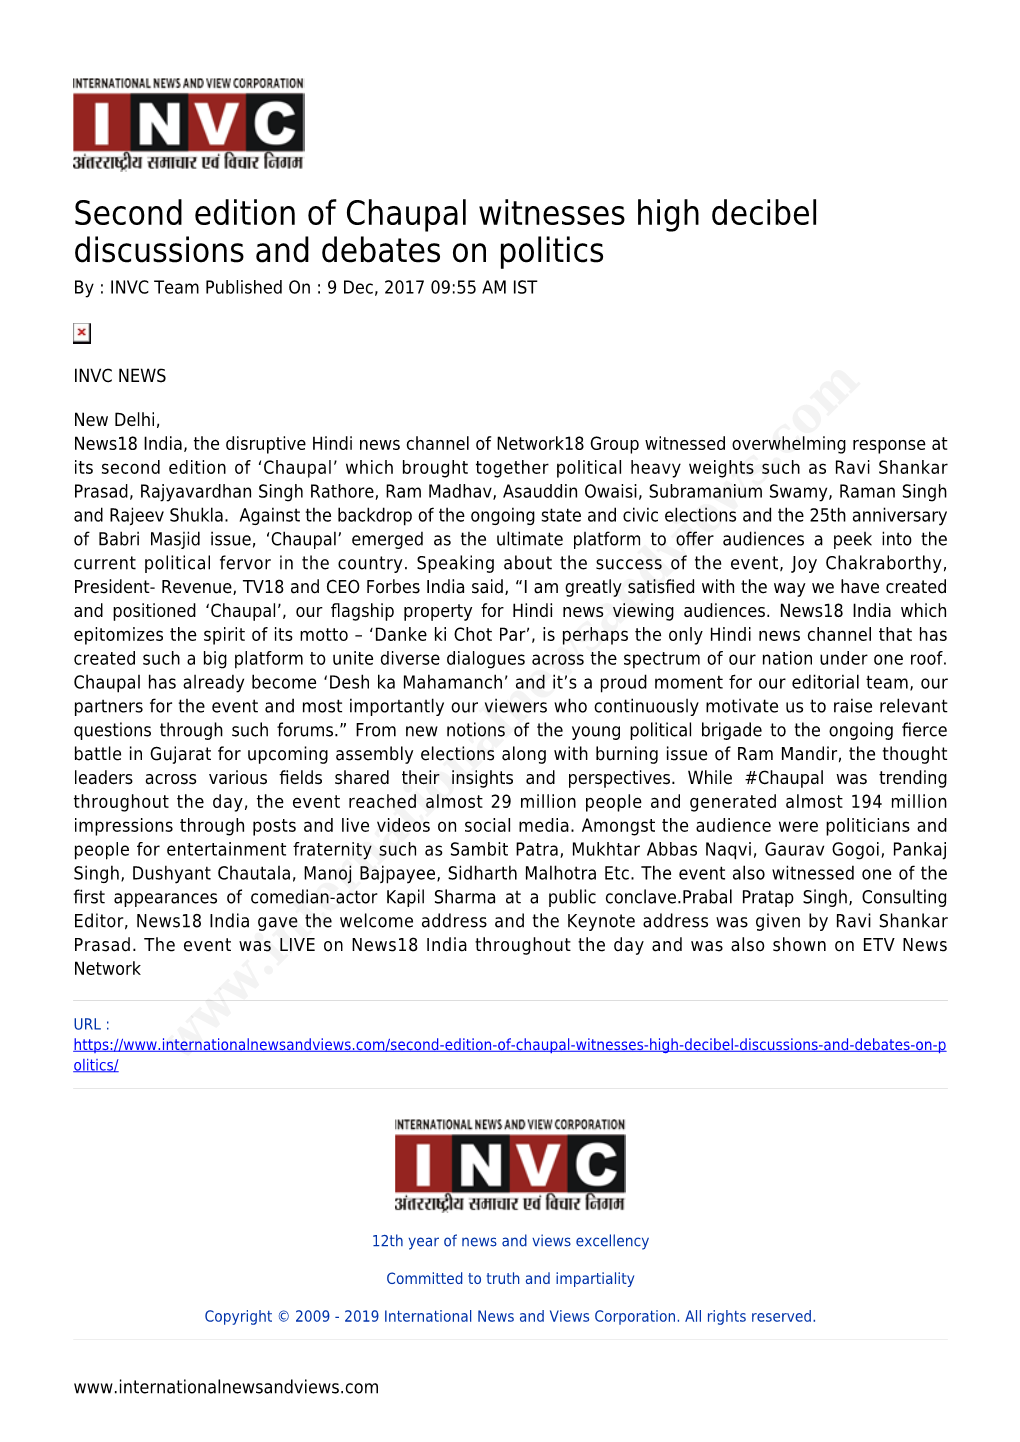 Second Edition of Chaupal Witnesses High Decibel Discussions and Debates on Politics by : INVC Team Published on : 9 Dec, 2017 09:55 AM IST